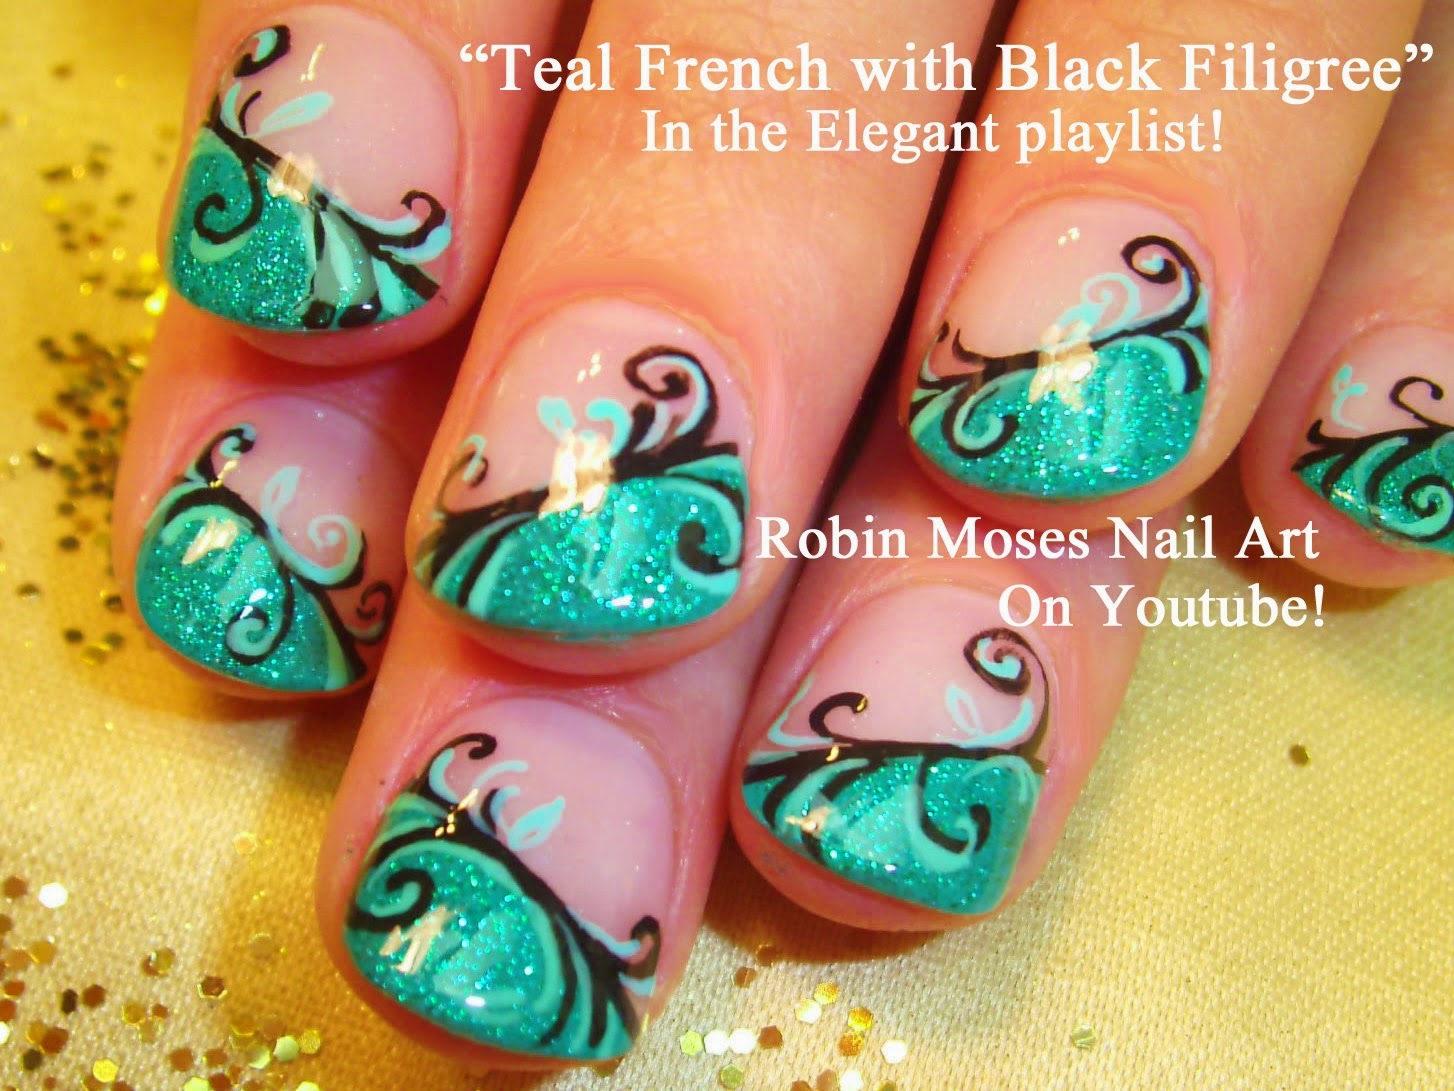 Nail Design with Teal and Floral Patterns - wide 1